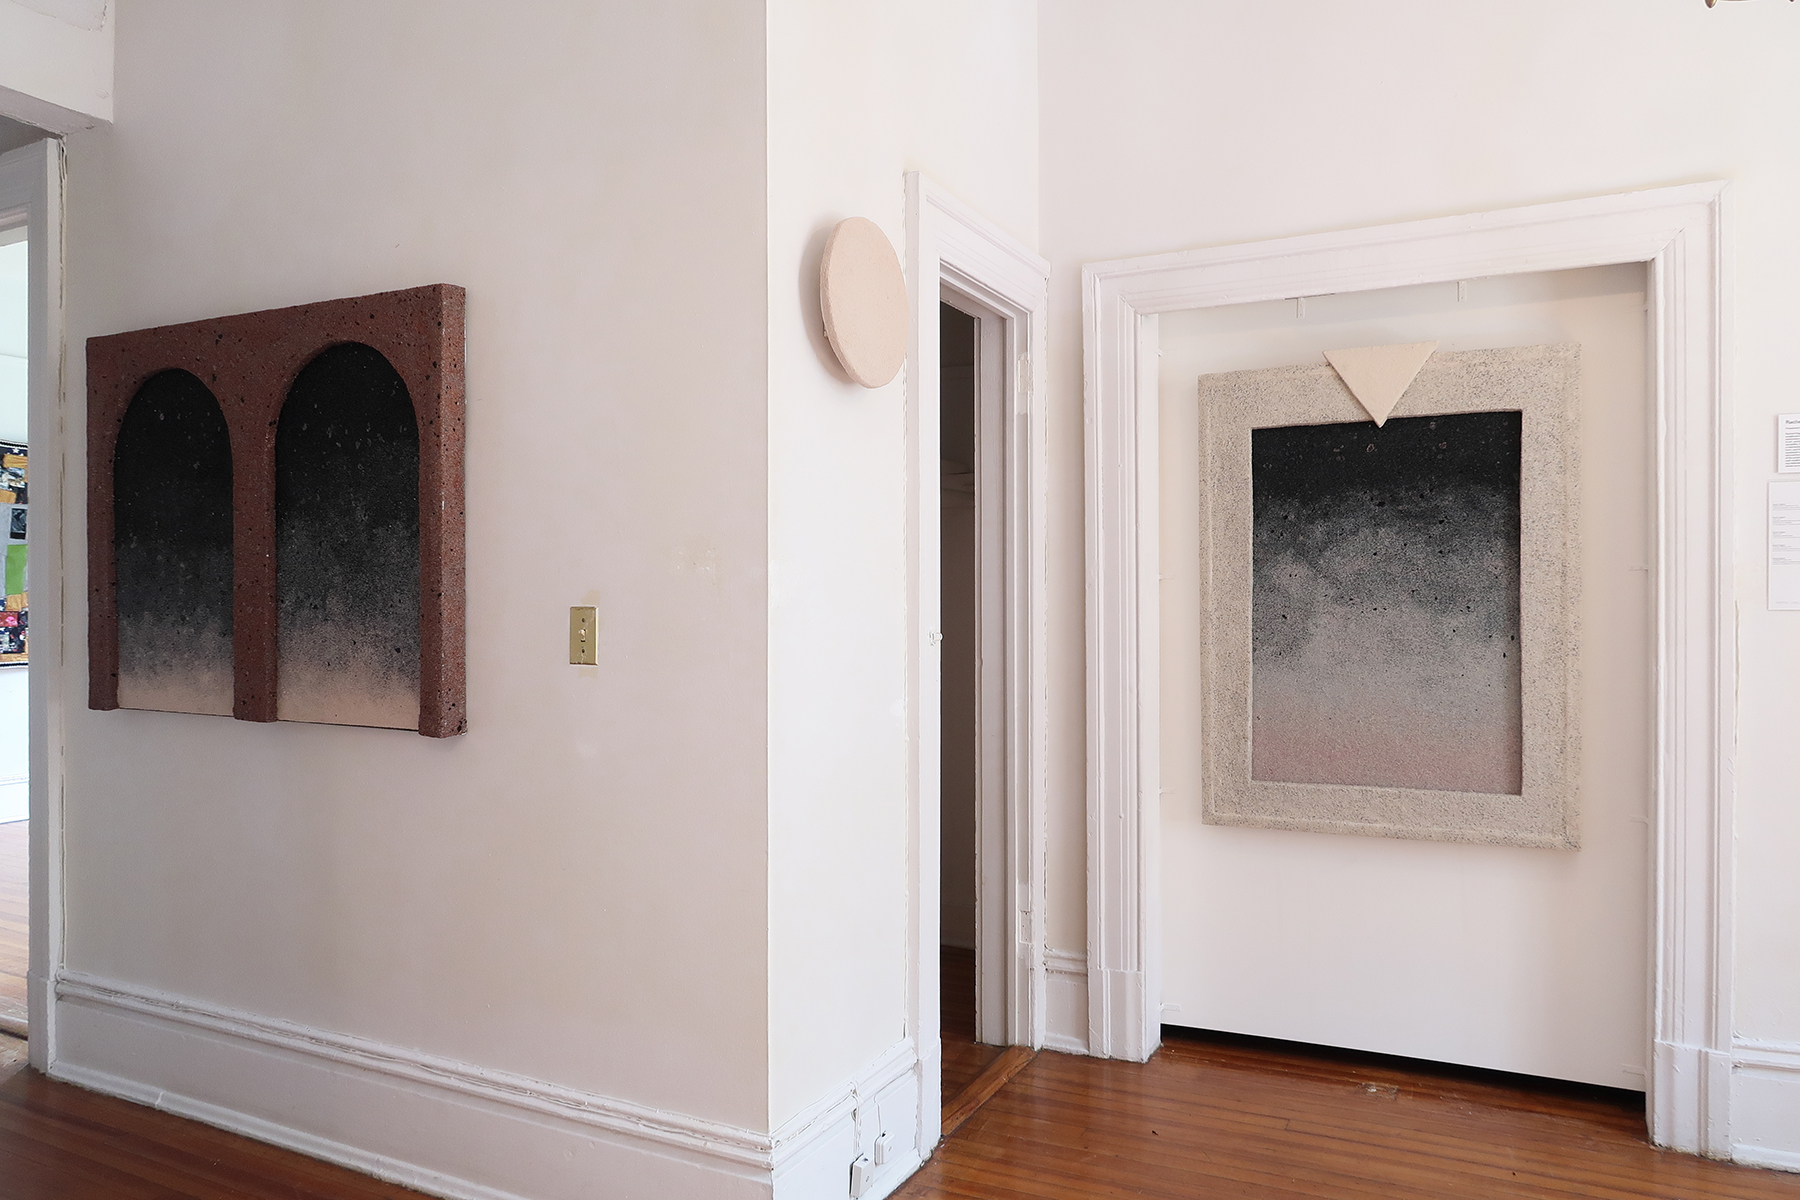 Installation view of Rachel Higgins's solo exhibition at NADA House showing rectangular and circular relief-based artworks